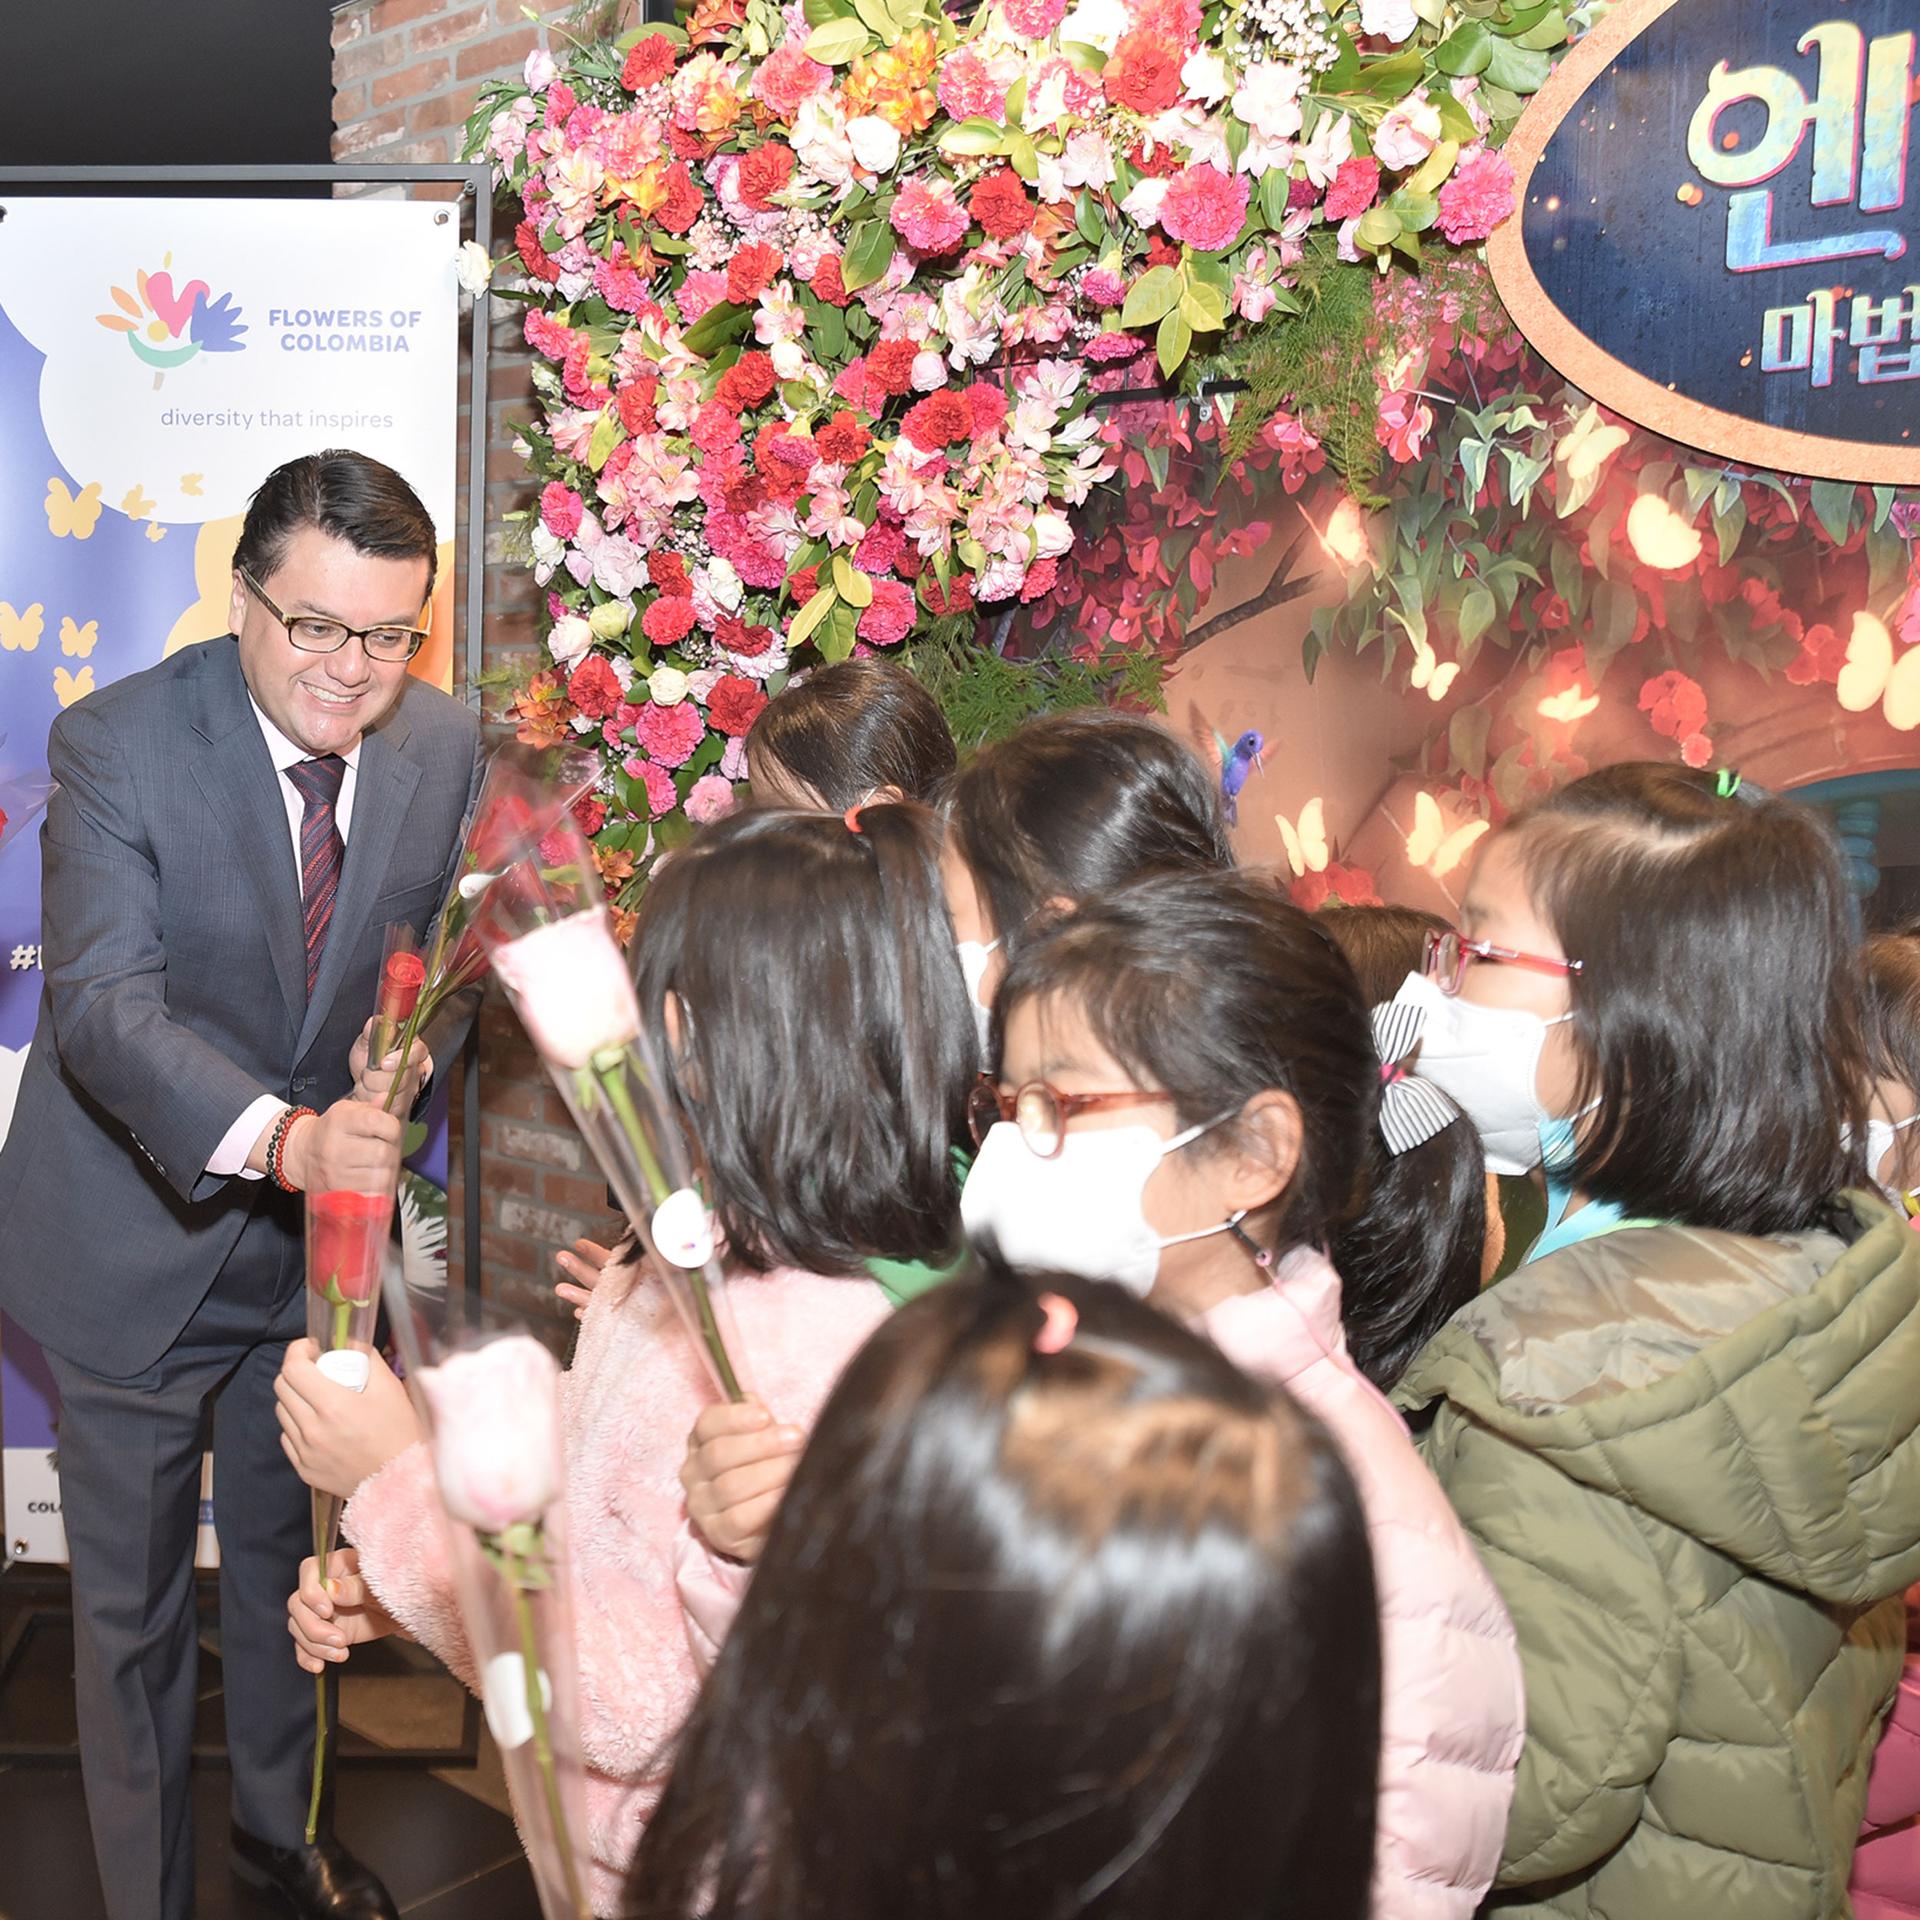 Colombia's ambassador to South Korea hands out flowers to children during the premiere of 